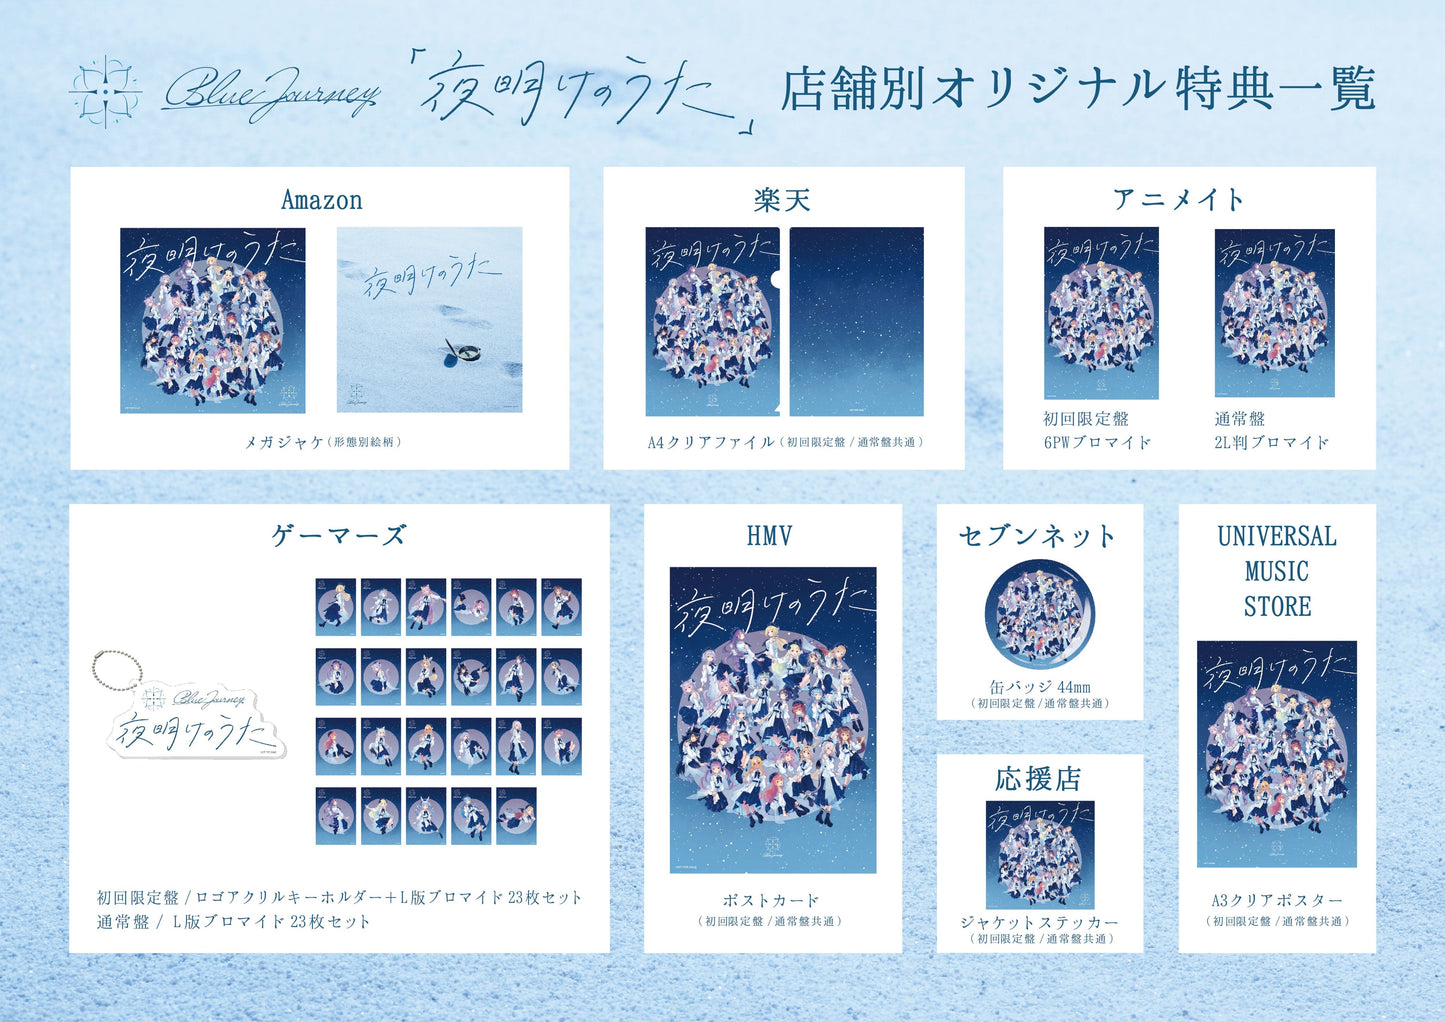  [In-stock]  Hololive 1st album 「#夜明けのうた」 First Limited Edition/Regular Edition CD - Gamers ver. (Limited Edition): KeyChain+ L-size 23 pieces photo set SE